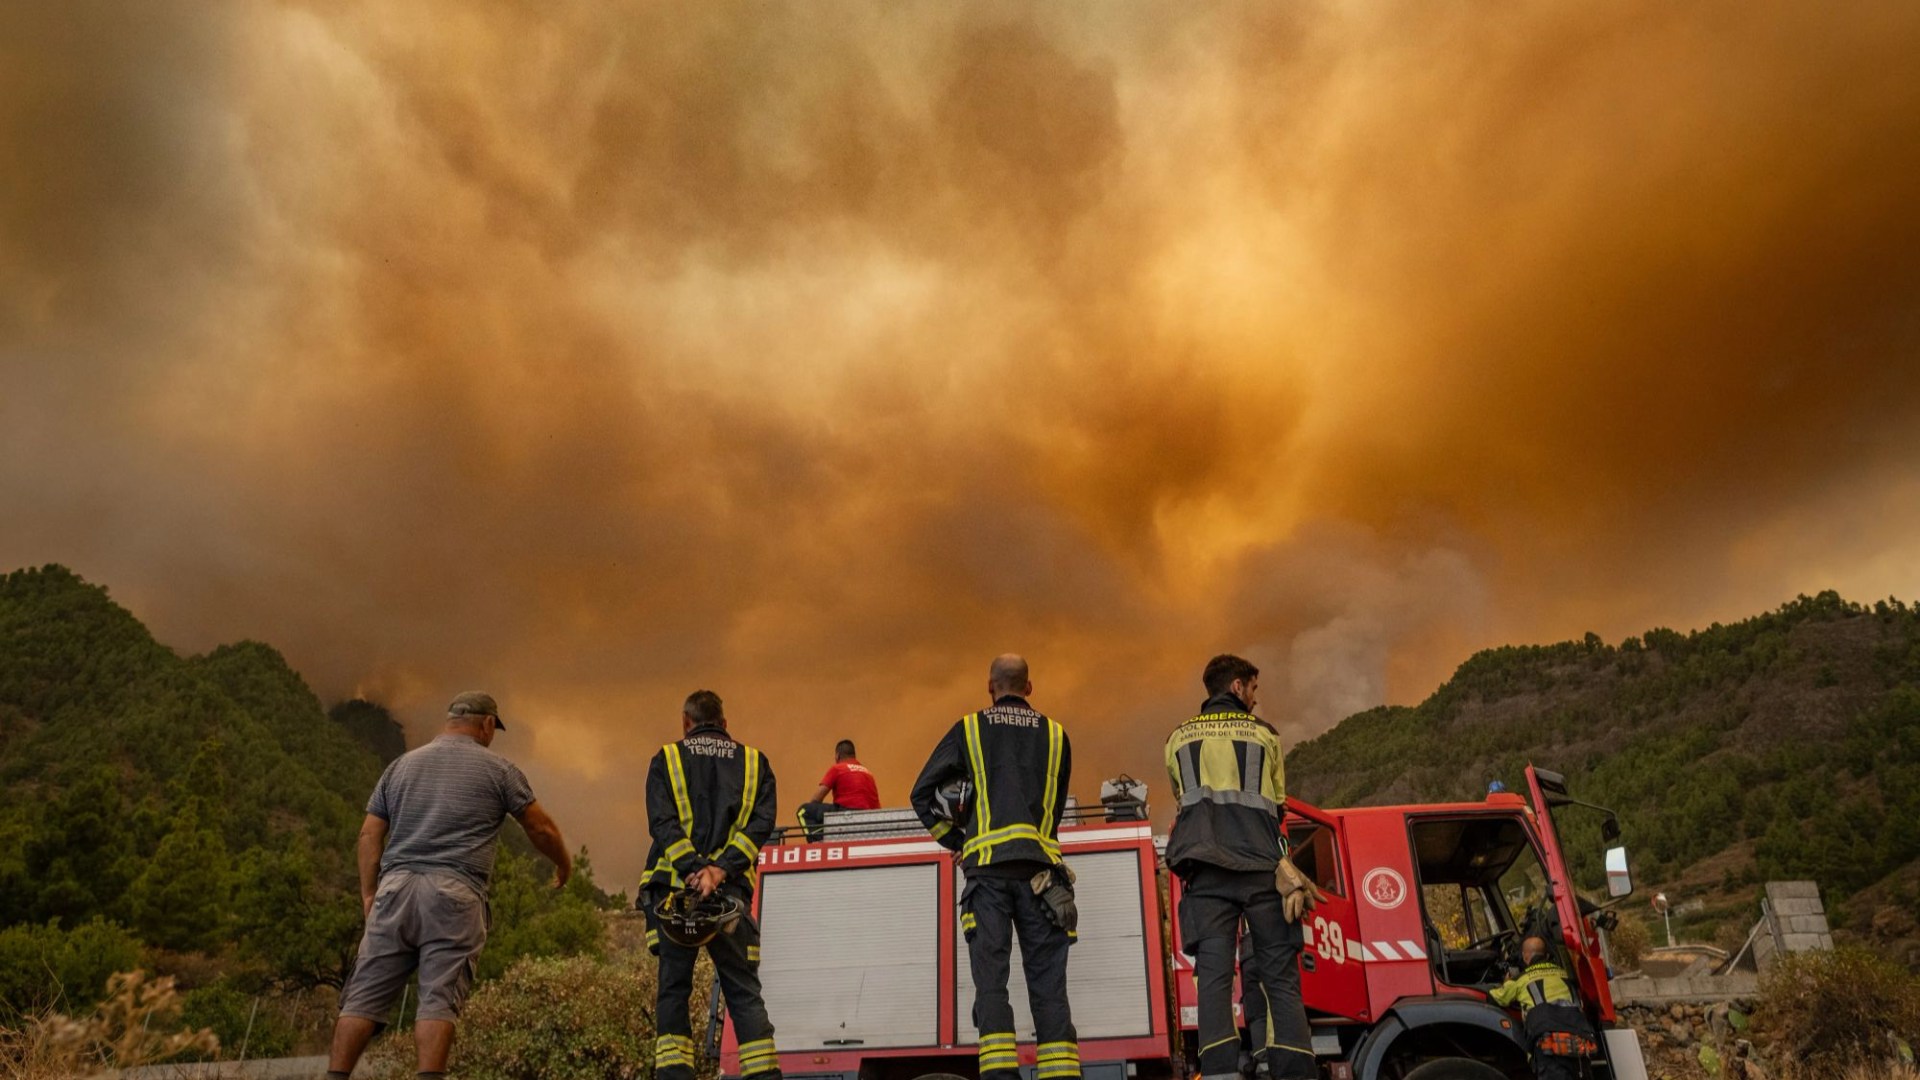 Urgent warning over ‘out of control’ wildfires ripping through Tenerife as holiday homes evacuated to escape inferno